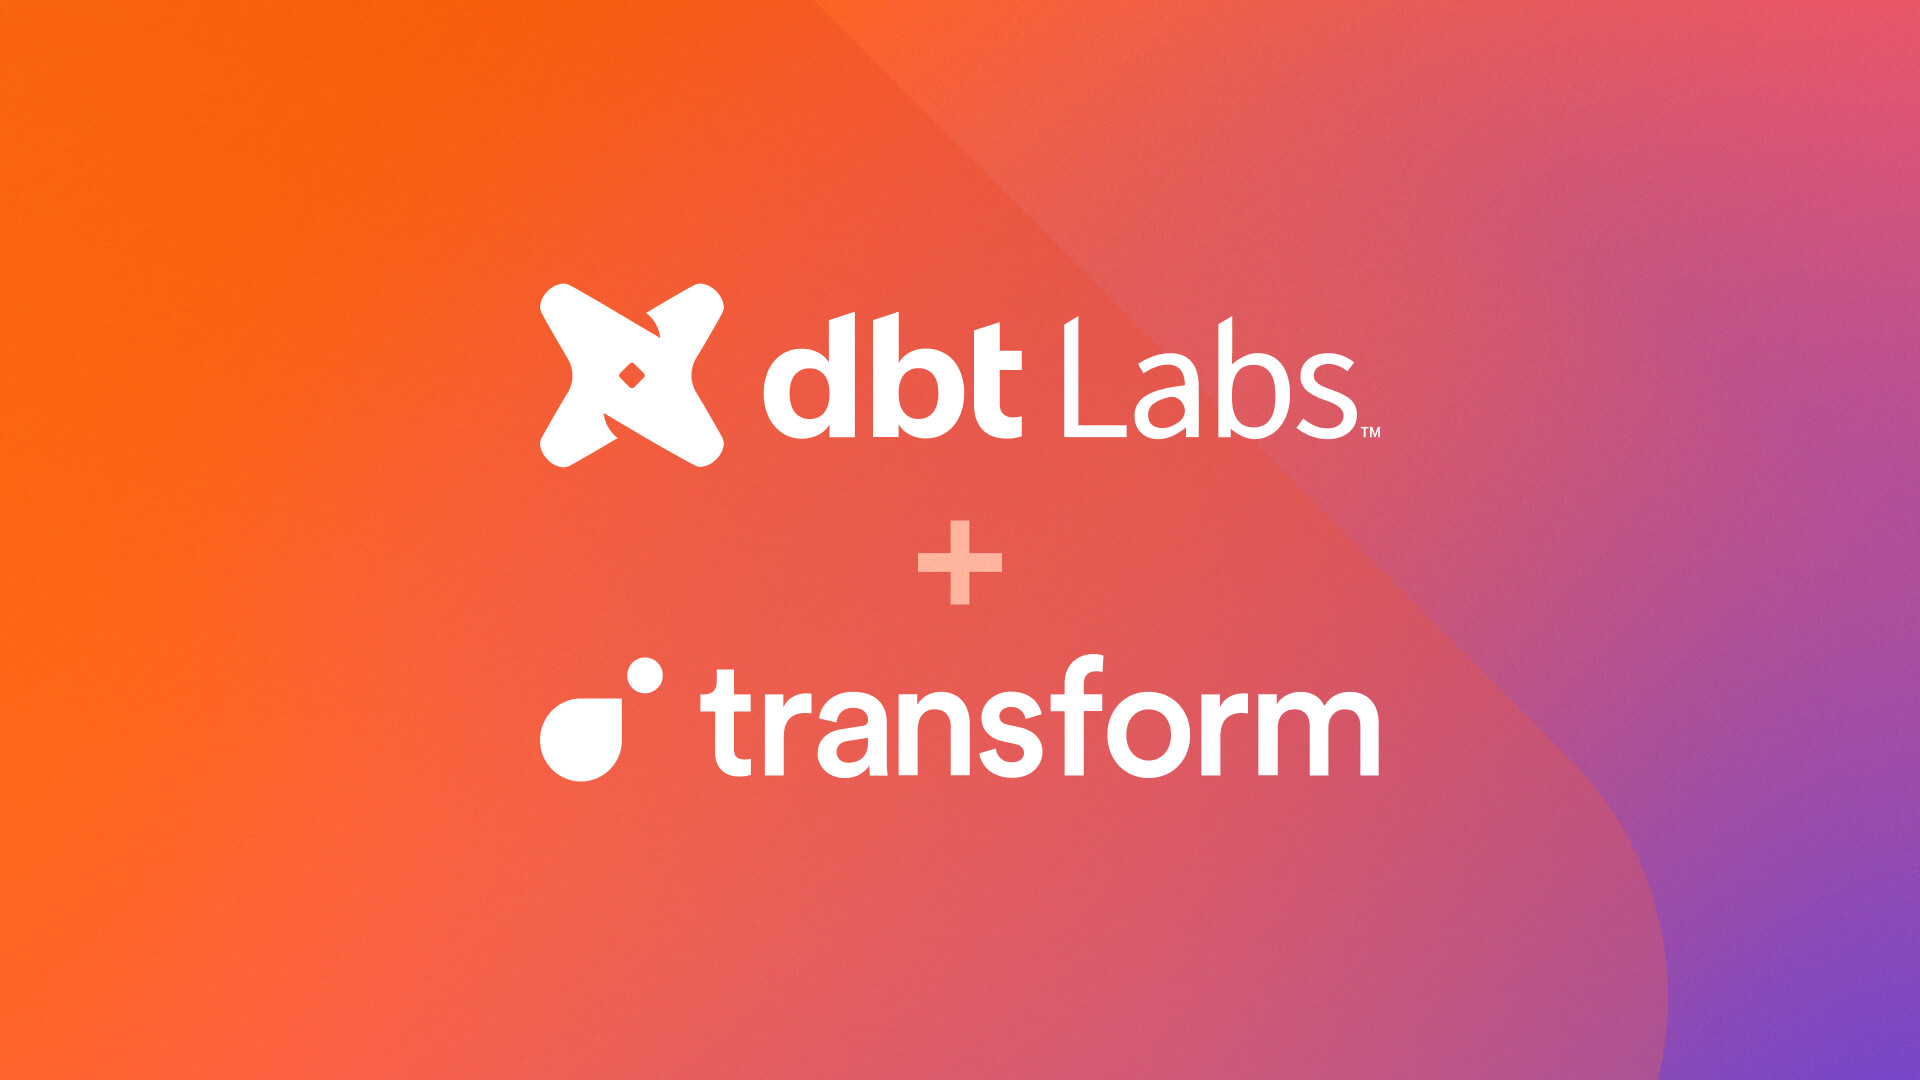 dbt Labs Signs Definitive Agreement to Acquire Transform, Accelerating development of the dbt Semantic Layer